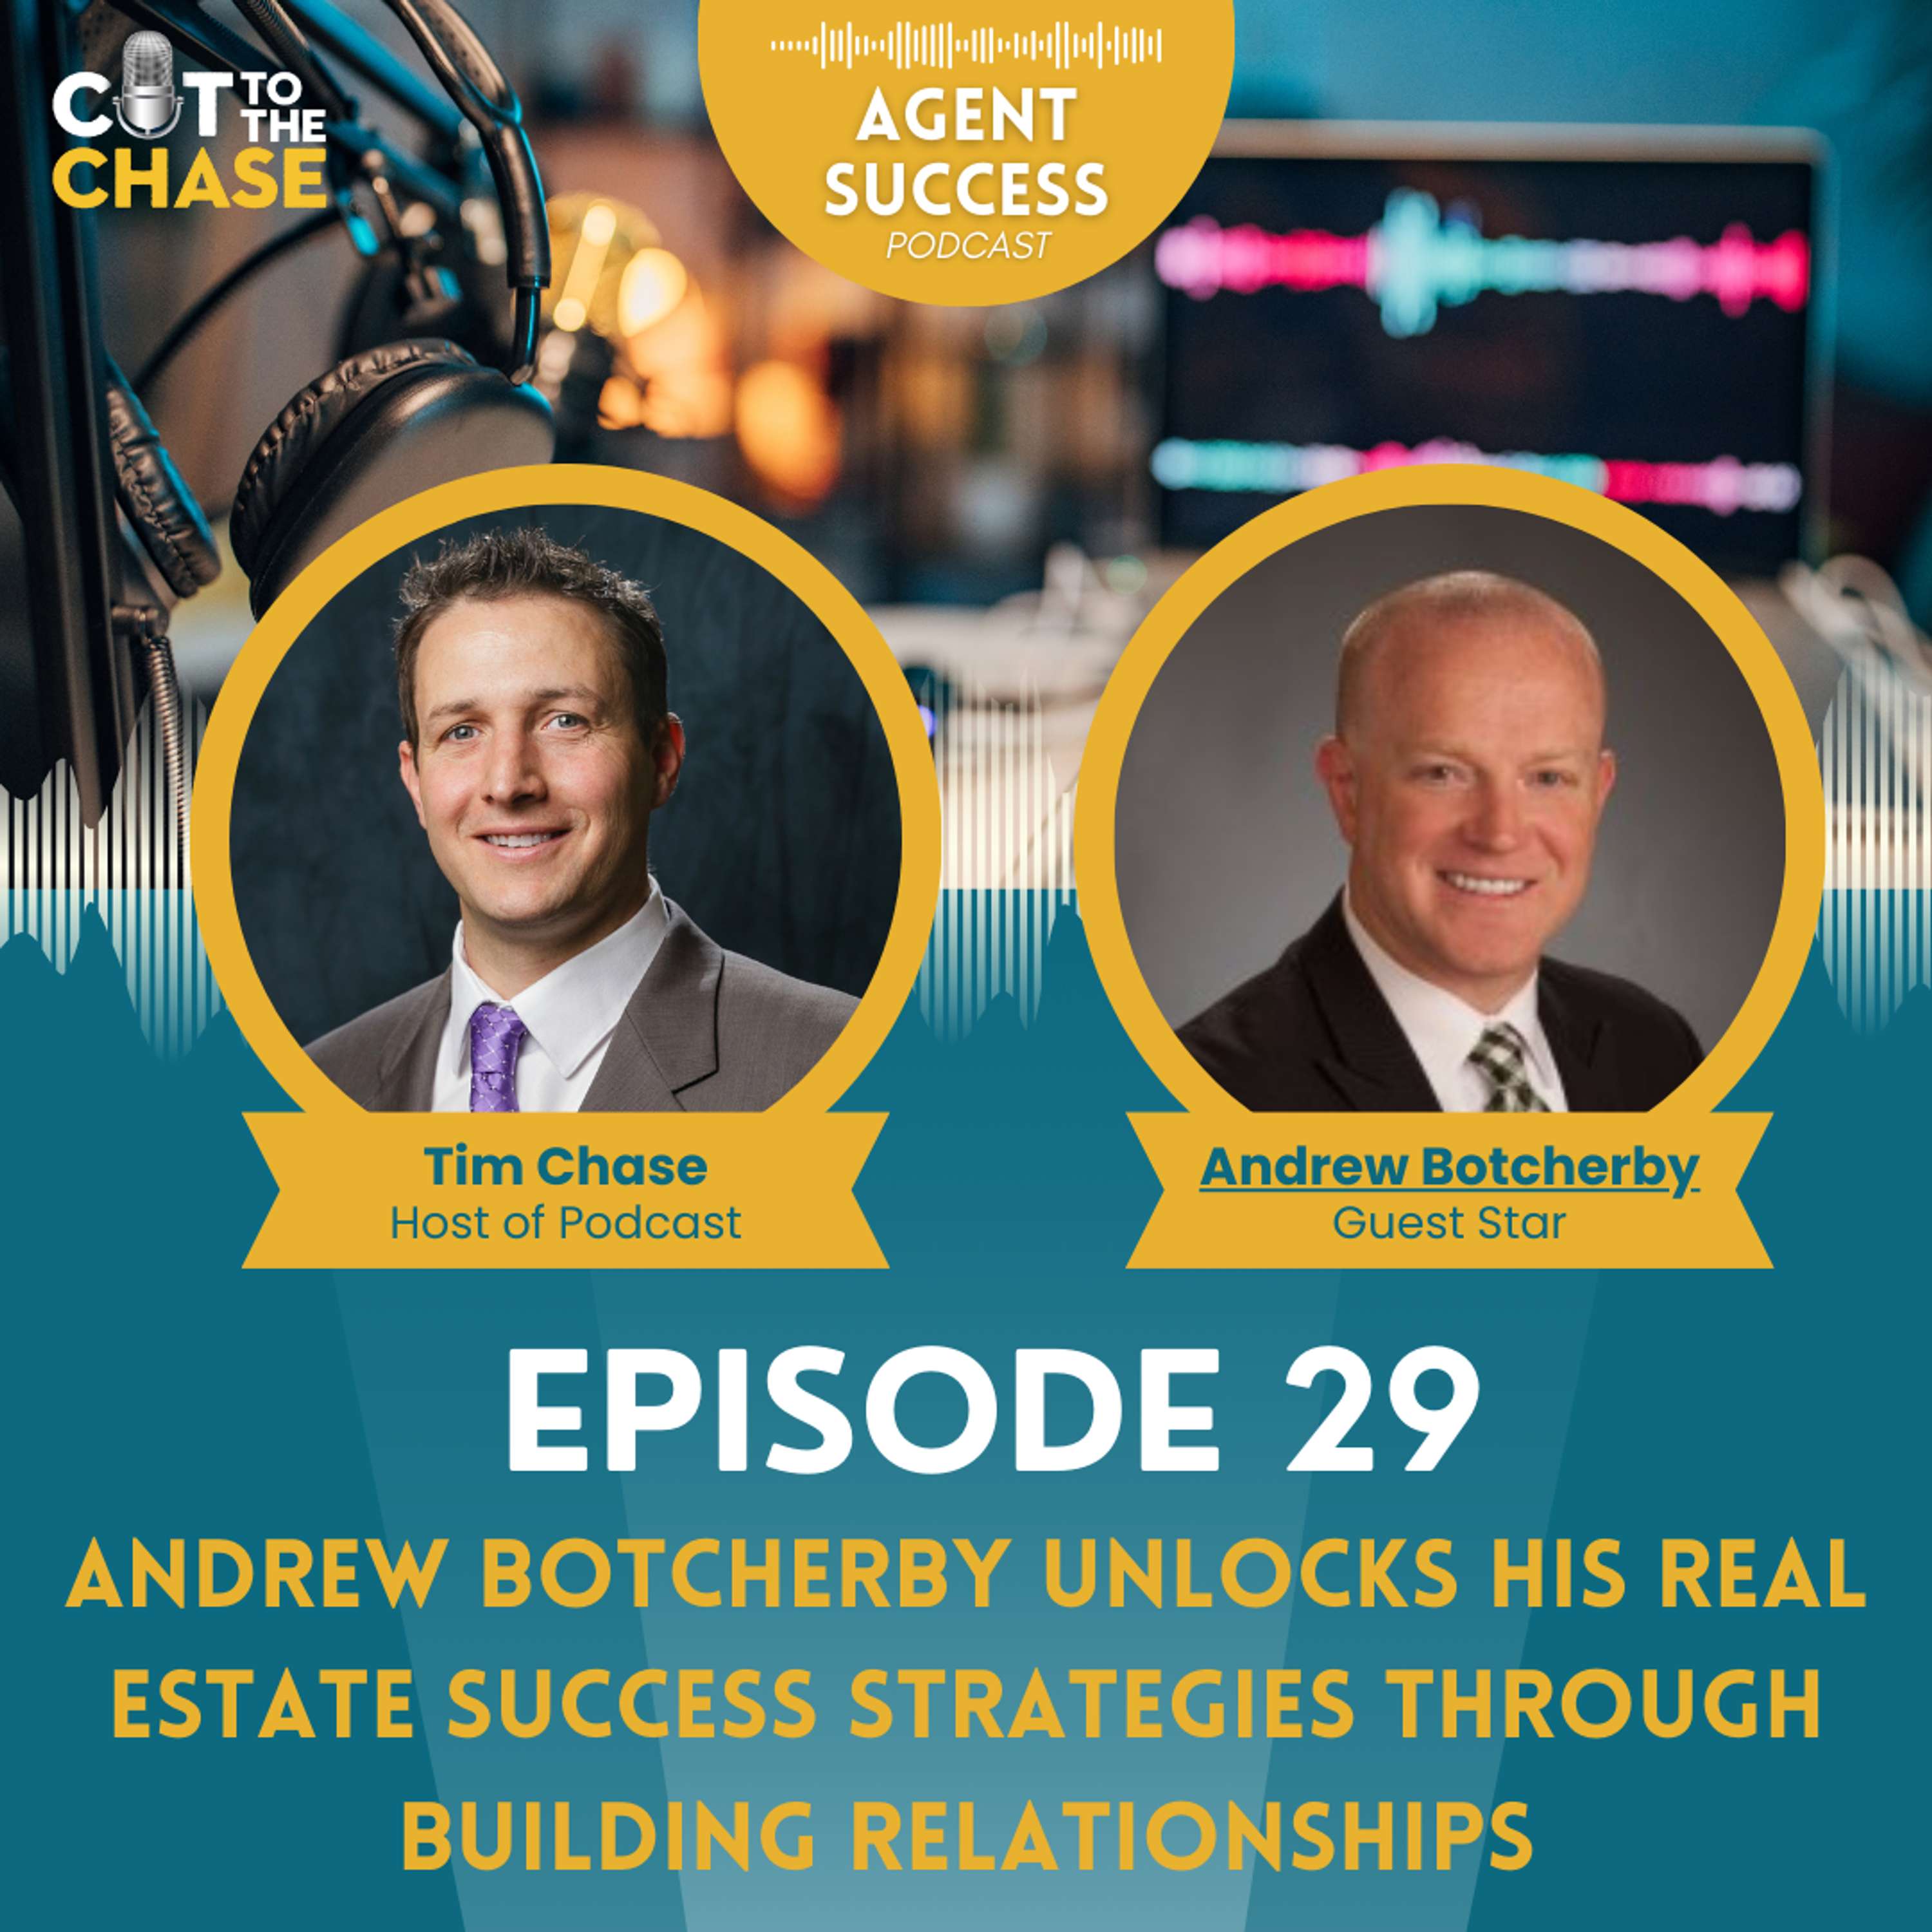 Episode 29: Andrew Botcherby Unlocks His Real Estate Success Strategies Through Building Relationships